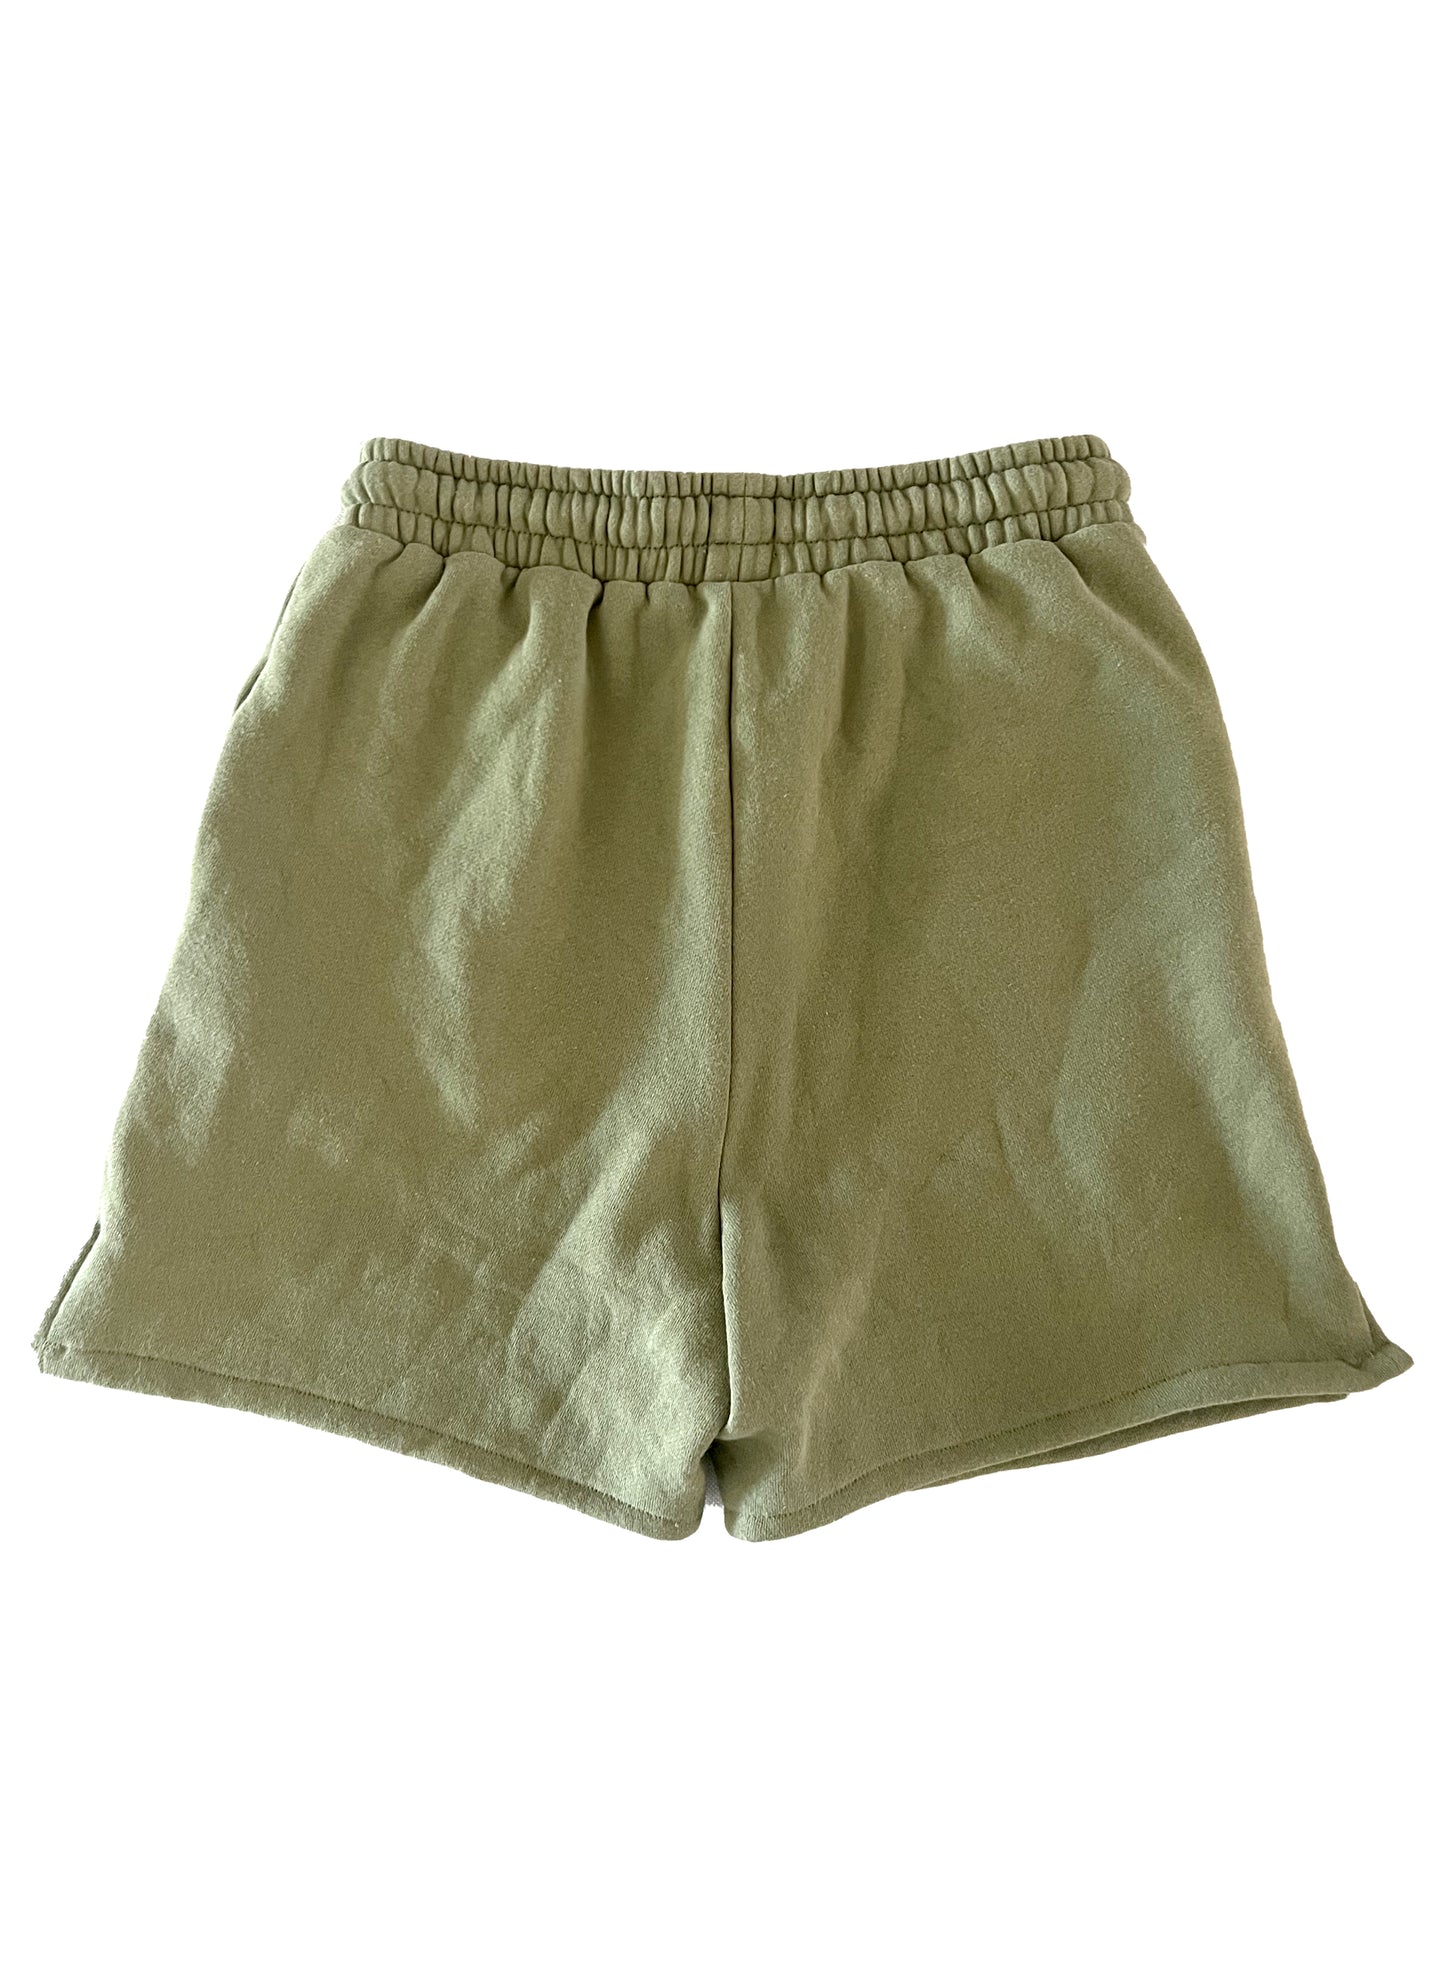 Reconstructed Smiley Sweatshorts - Lime Green